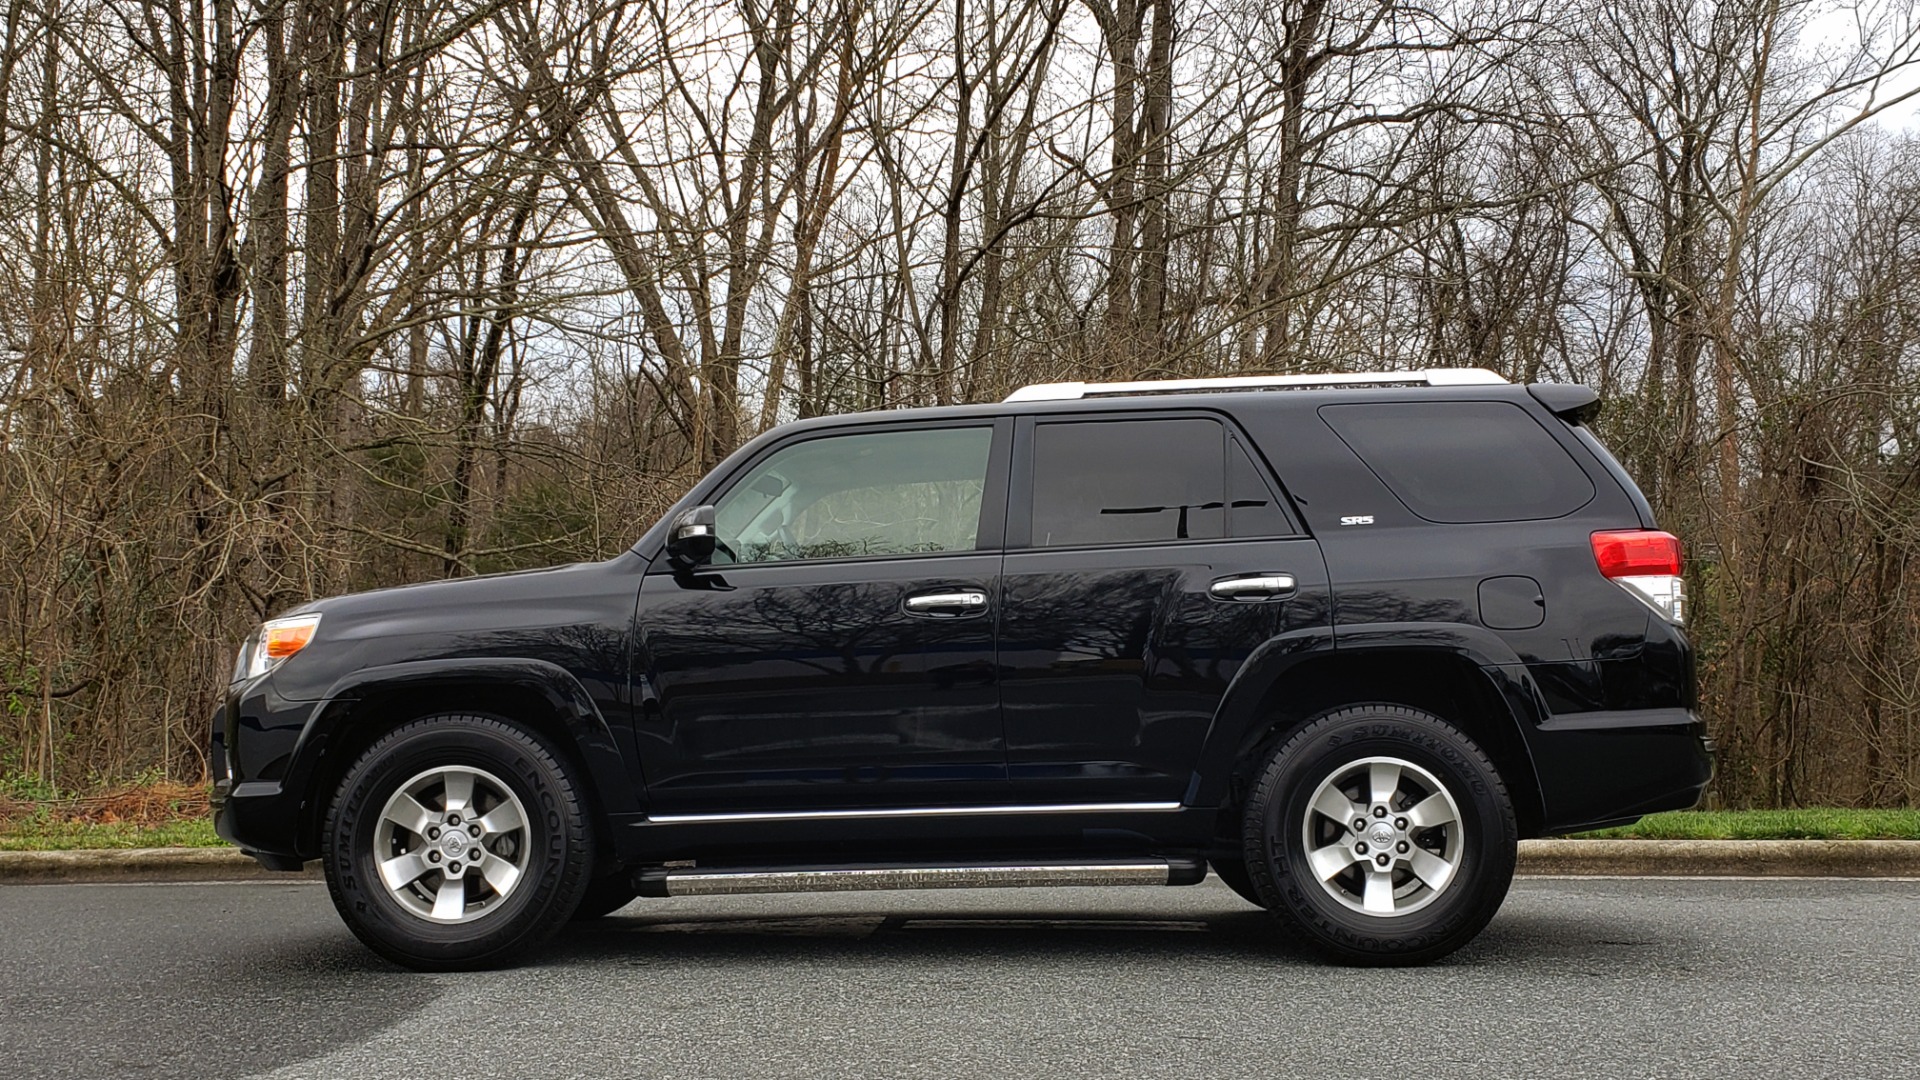 Used 2011 Toyota 4RUNNER SR5 2WD / 5-SPD AUTO / 4.0L V6 / SAT RADIO / PWR STS for sale Sold at Formula Imports in Charlotte NC 28227 2